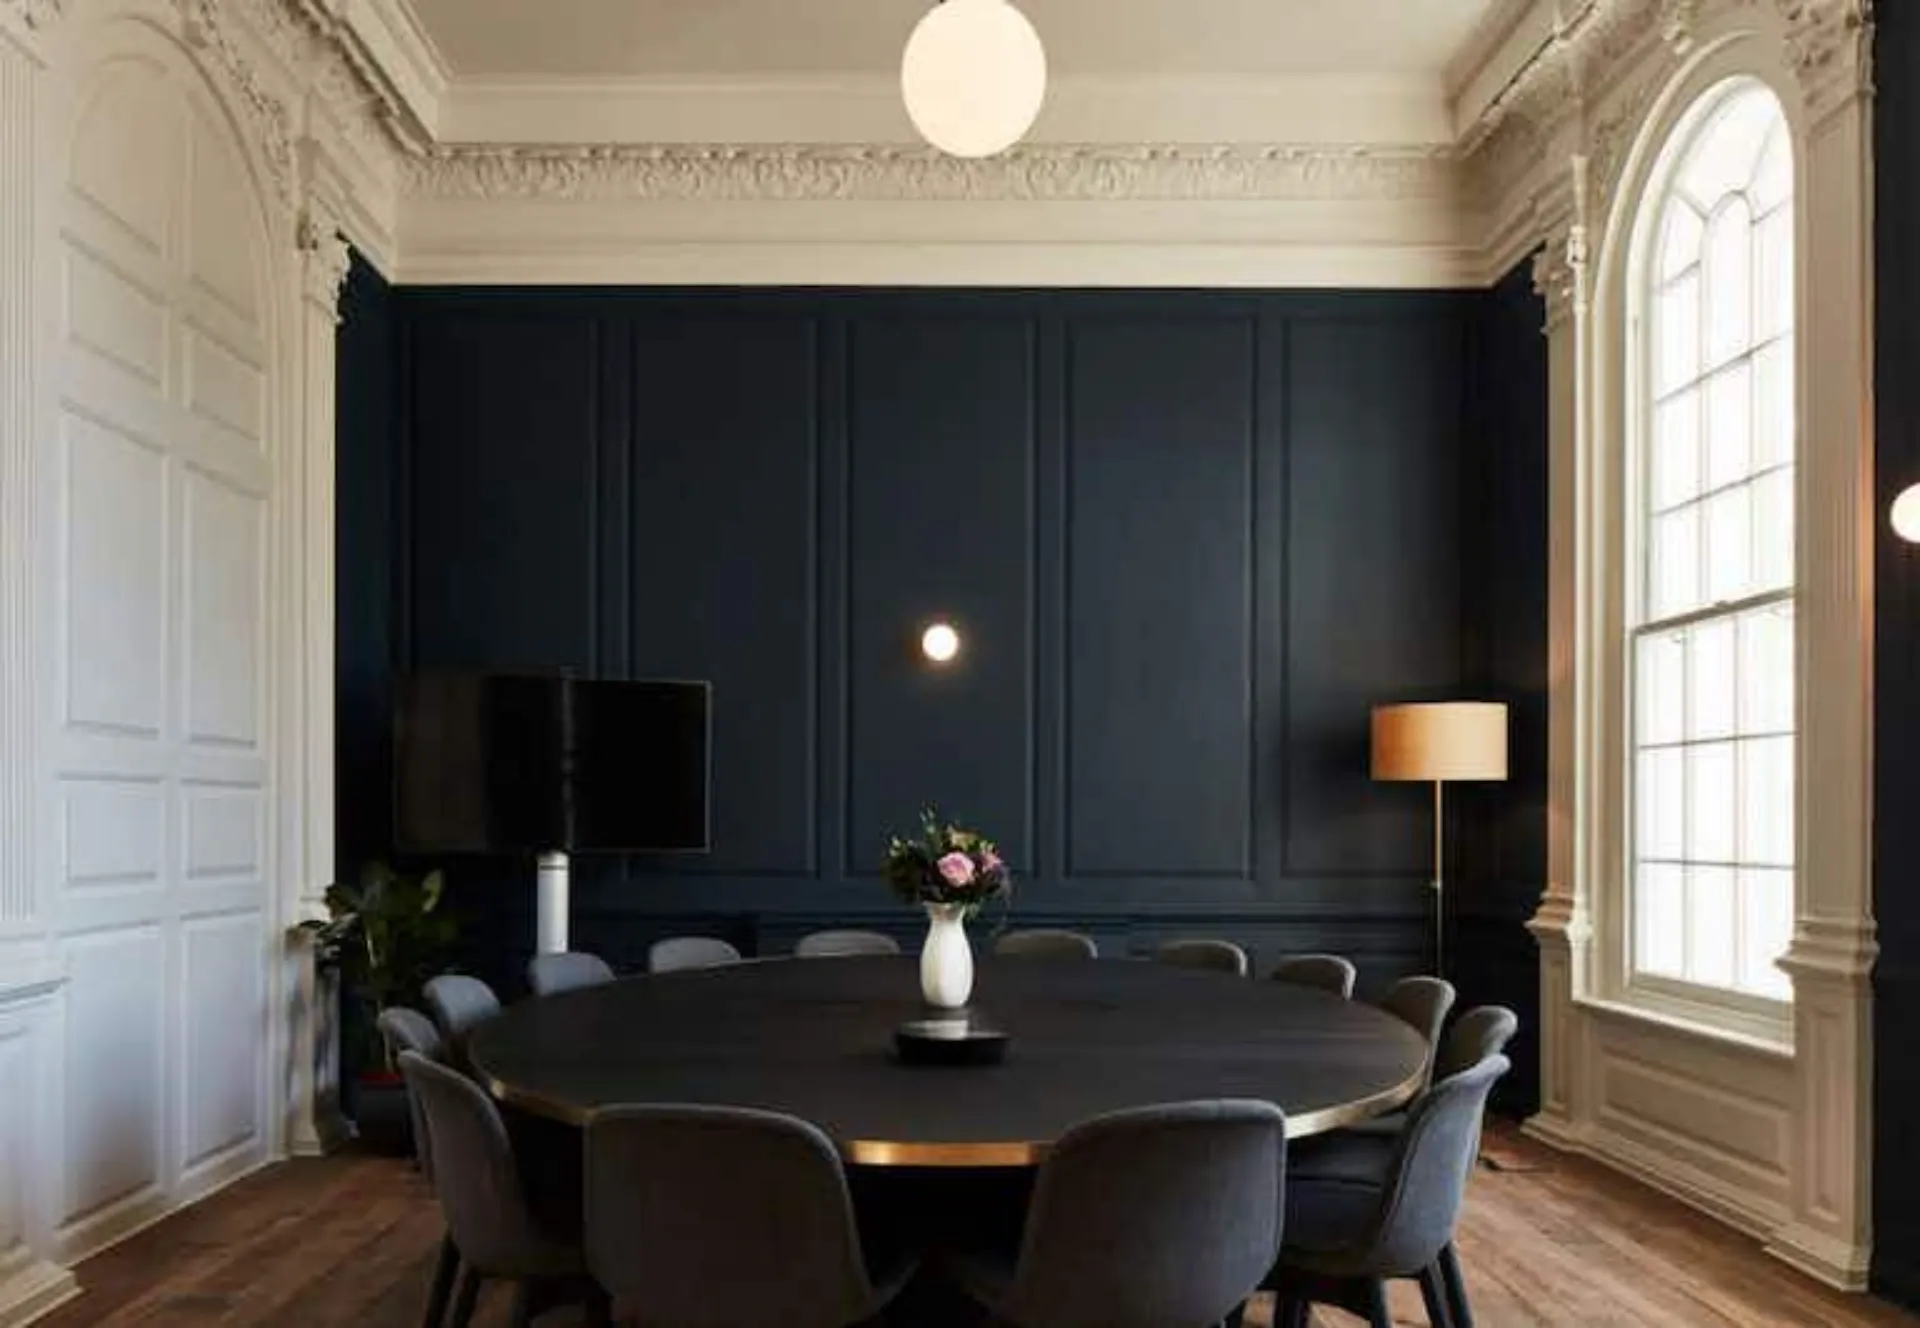 Kindred meeting room venue london hire spacious light boardroom conference room presentations